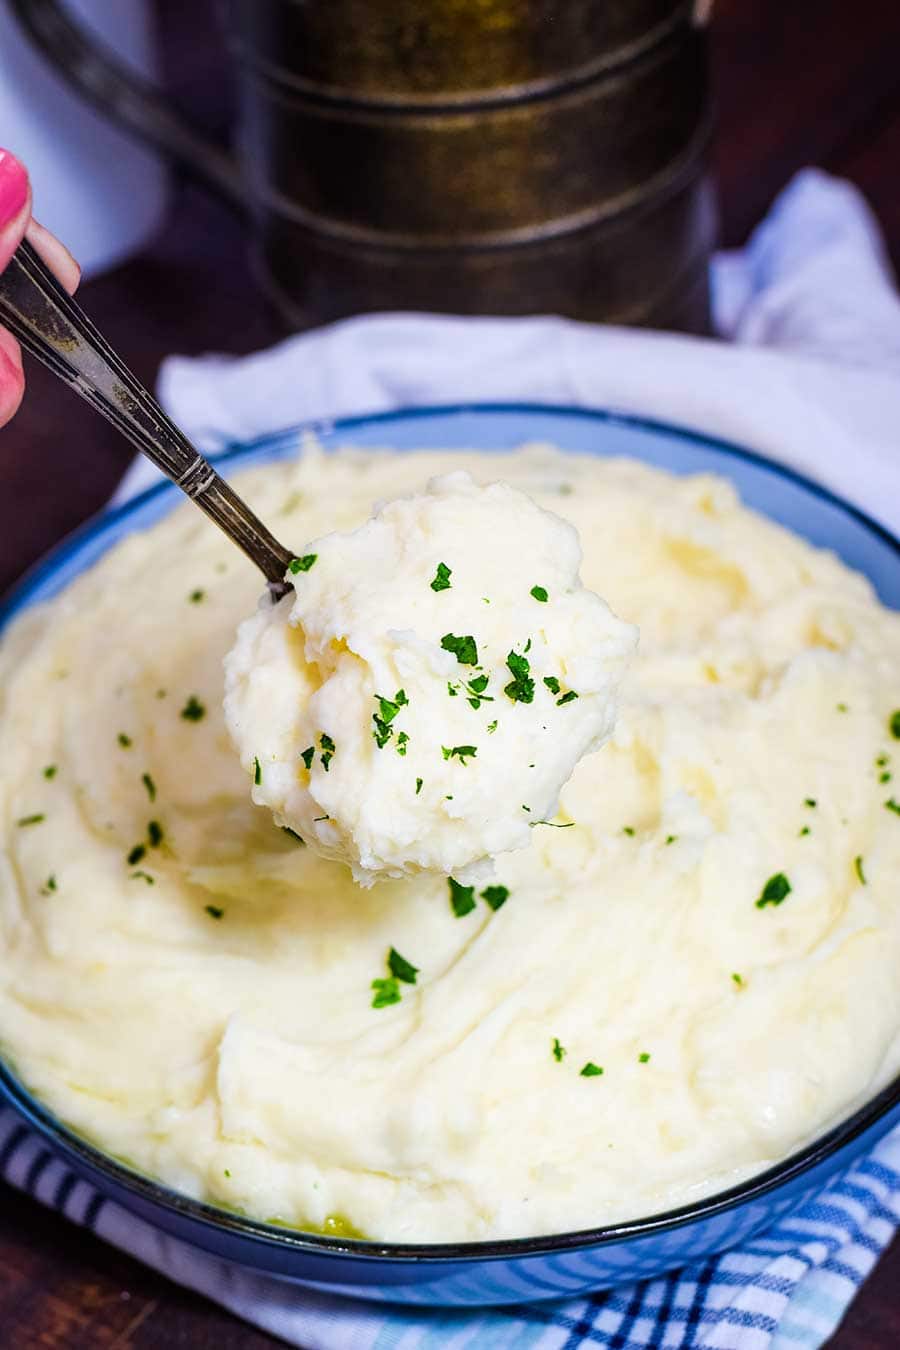 A bowl of slow cooker mashed potatoes served with a spoon.